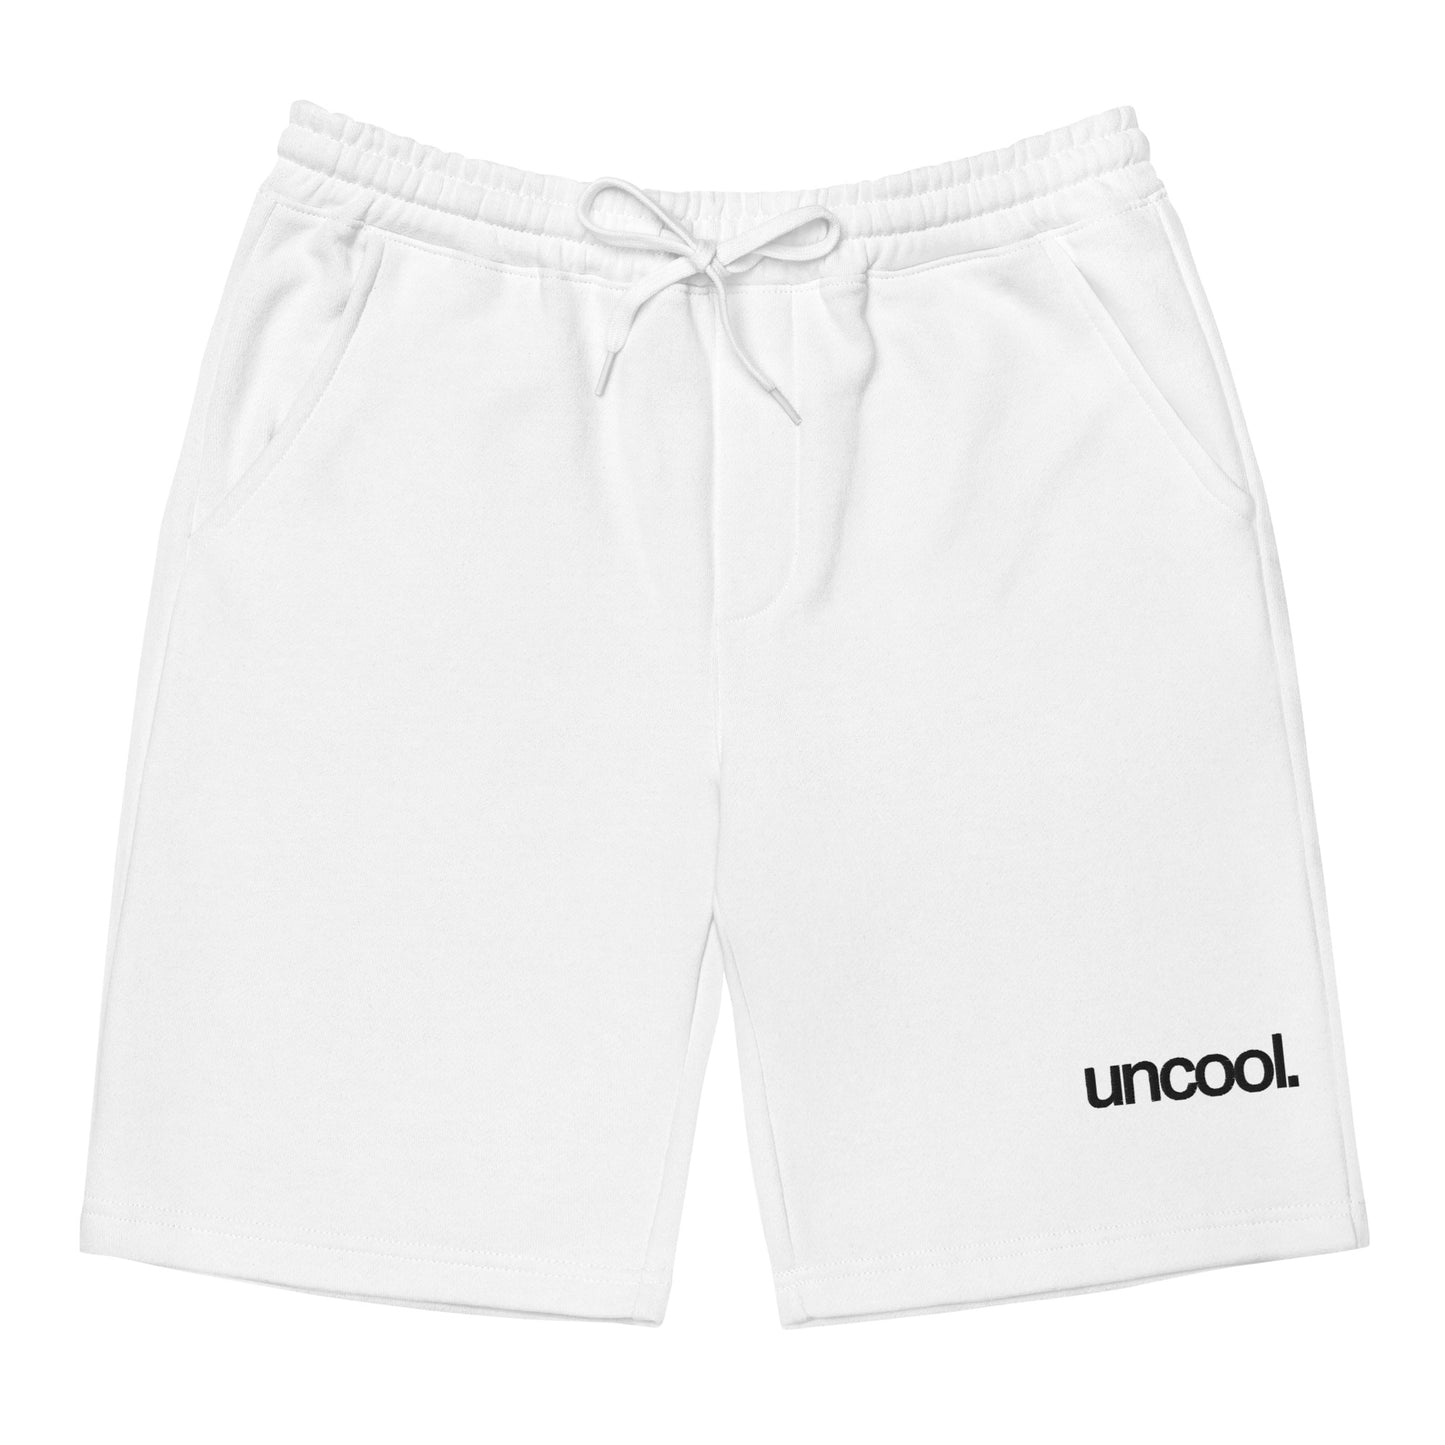 uncool. Fleece Shorts (Embroidered)